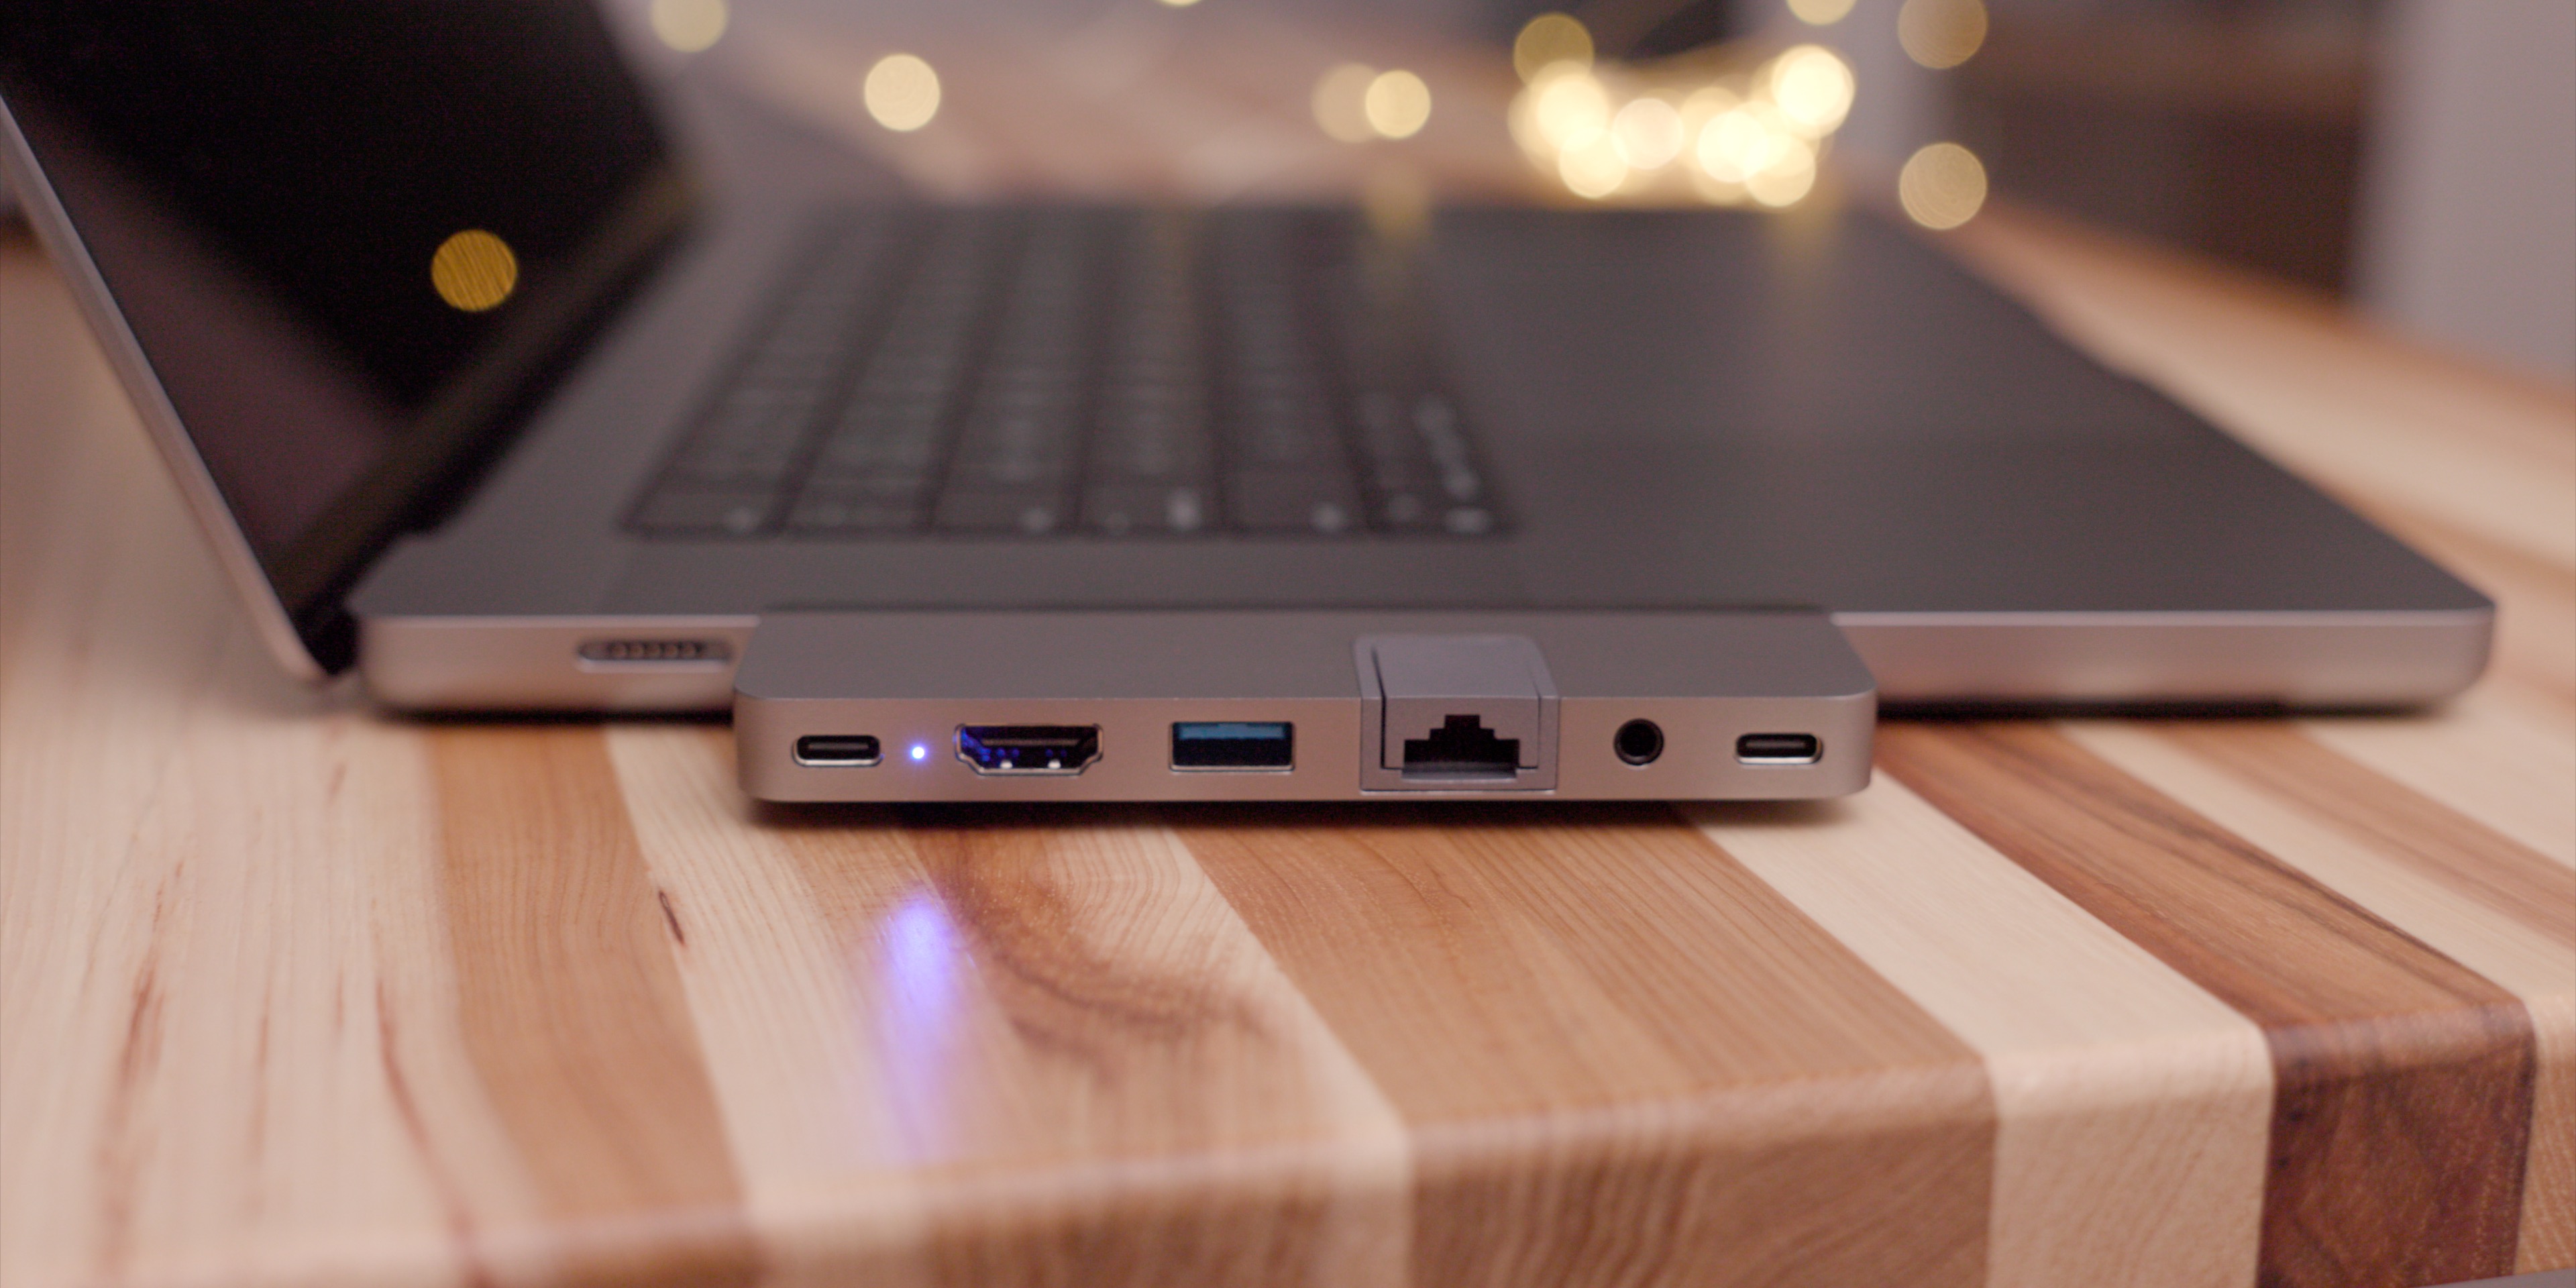 Hands-on: HyperDrive Duo USB-C hub for the 2016-2021 MacBook Pro [Video] - 9to5Mac